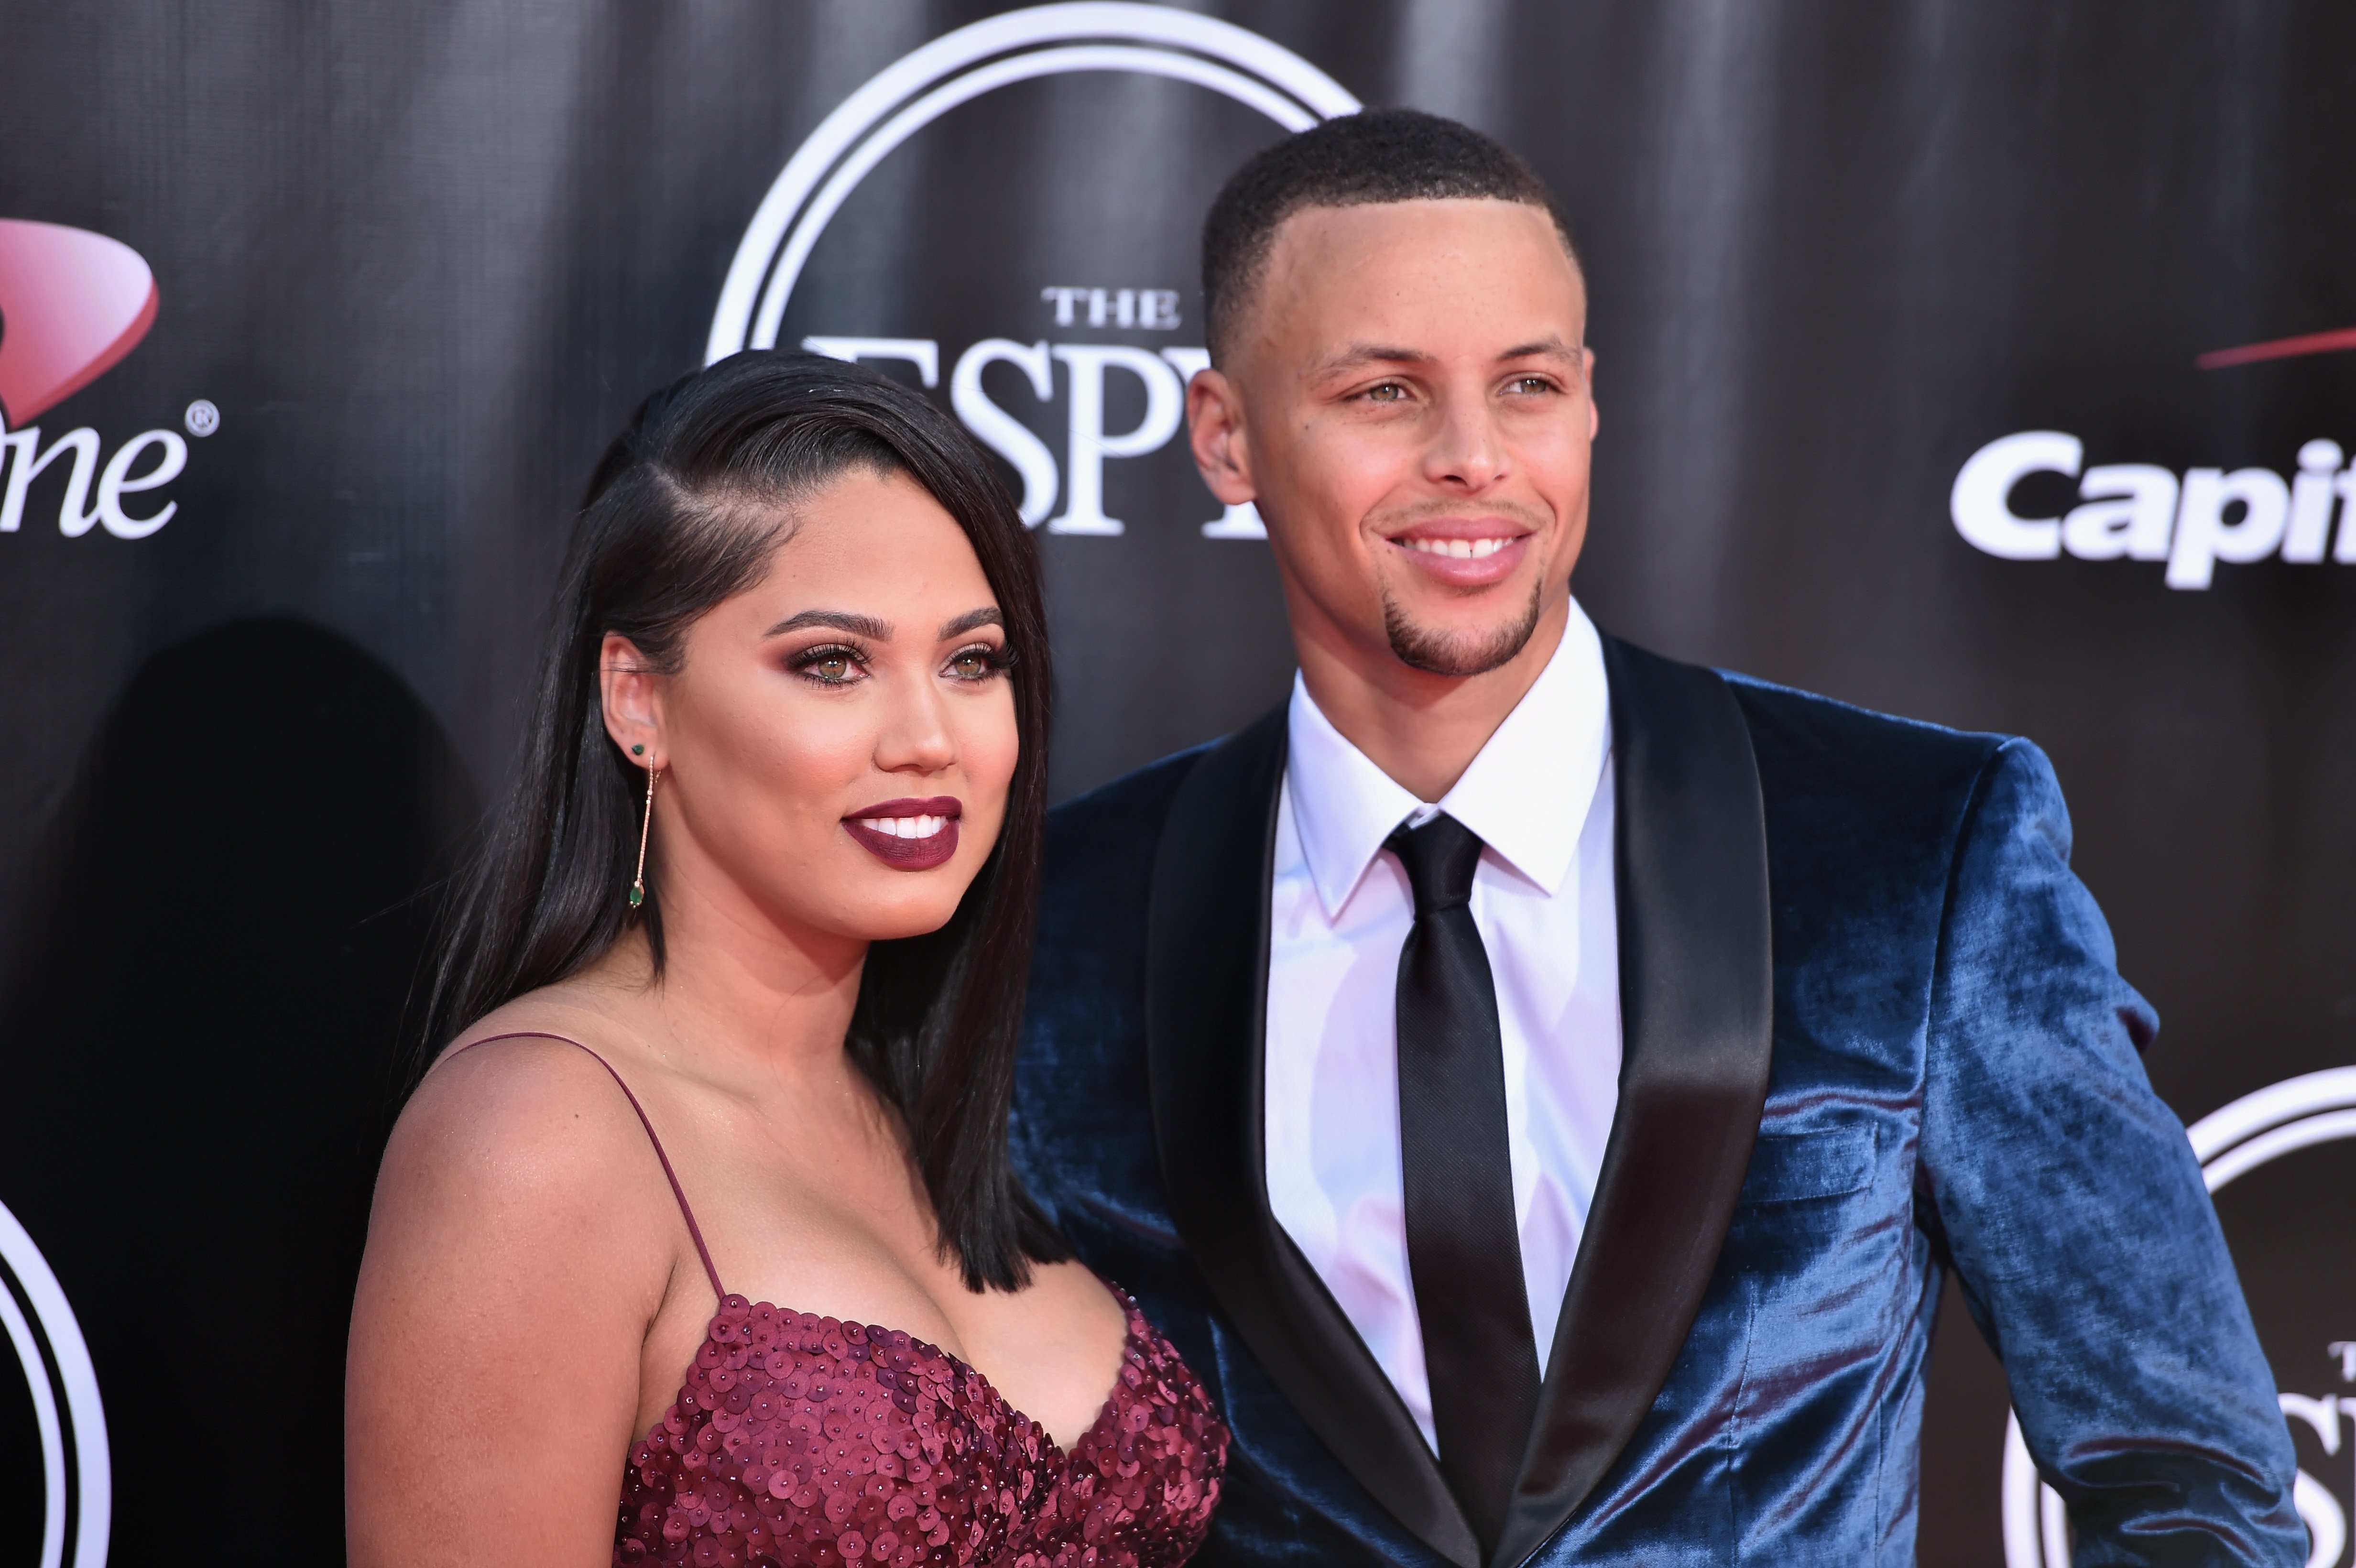 NBA player Stephen Curry and Ayesha Curry attend the 2016 ESPYS at Microsoft Theater on July 13, 2016. | Photo: Getty Images